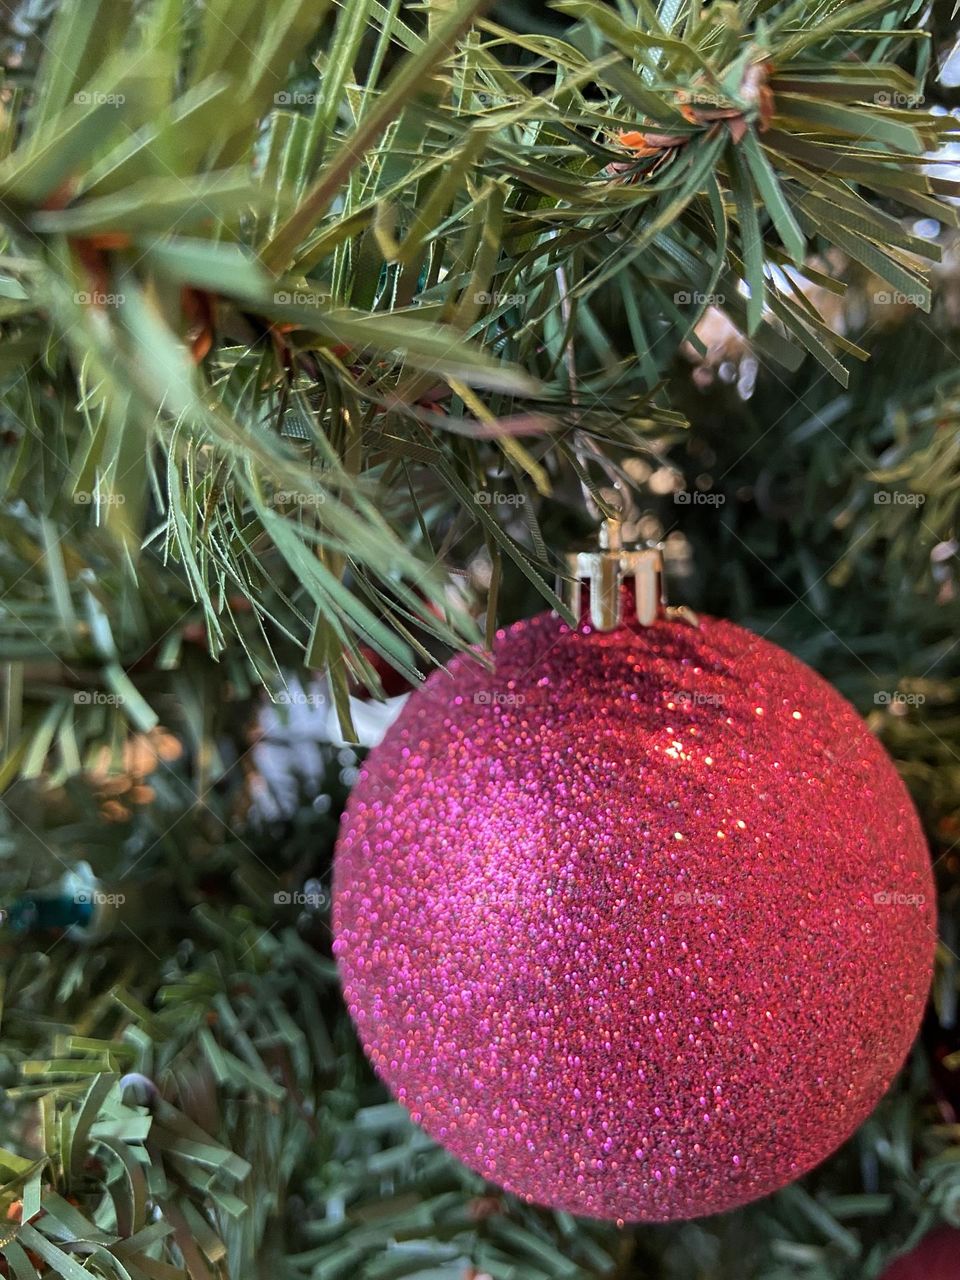 A magenta Christmas ornament hanging on a Christmas tree that was part of the holiday decorations at Panera Bread in Brick, NJ.